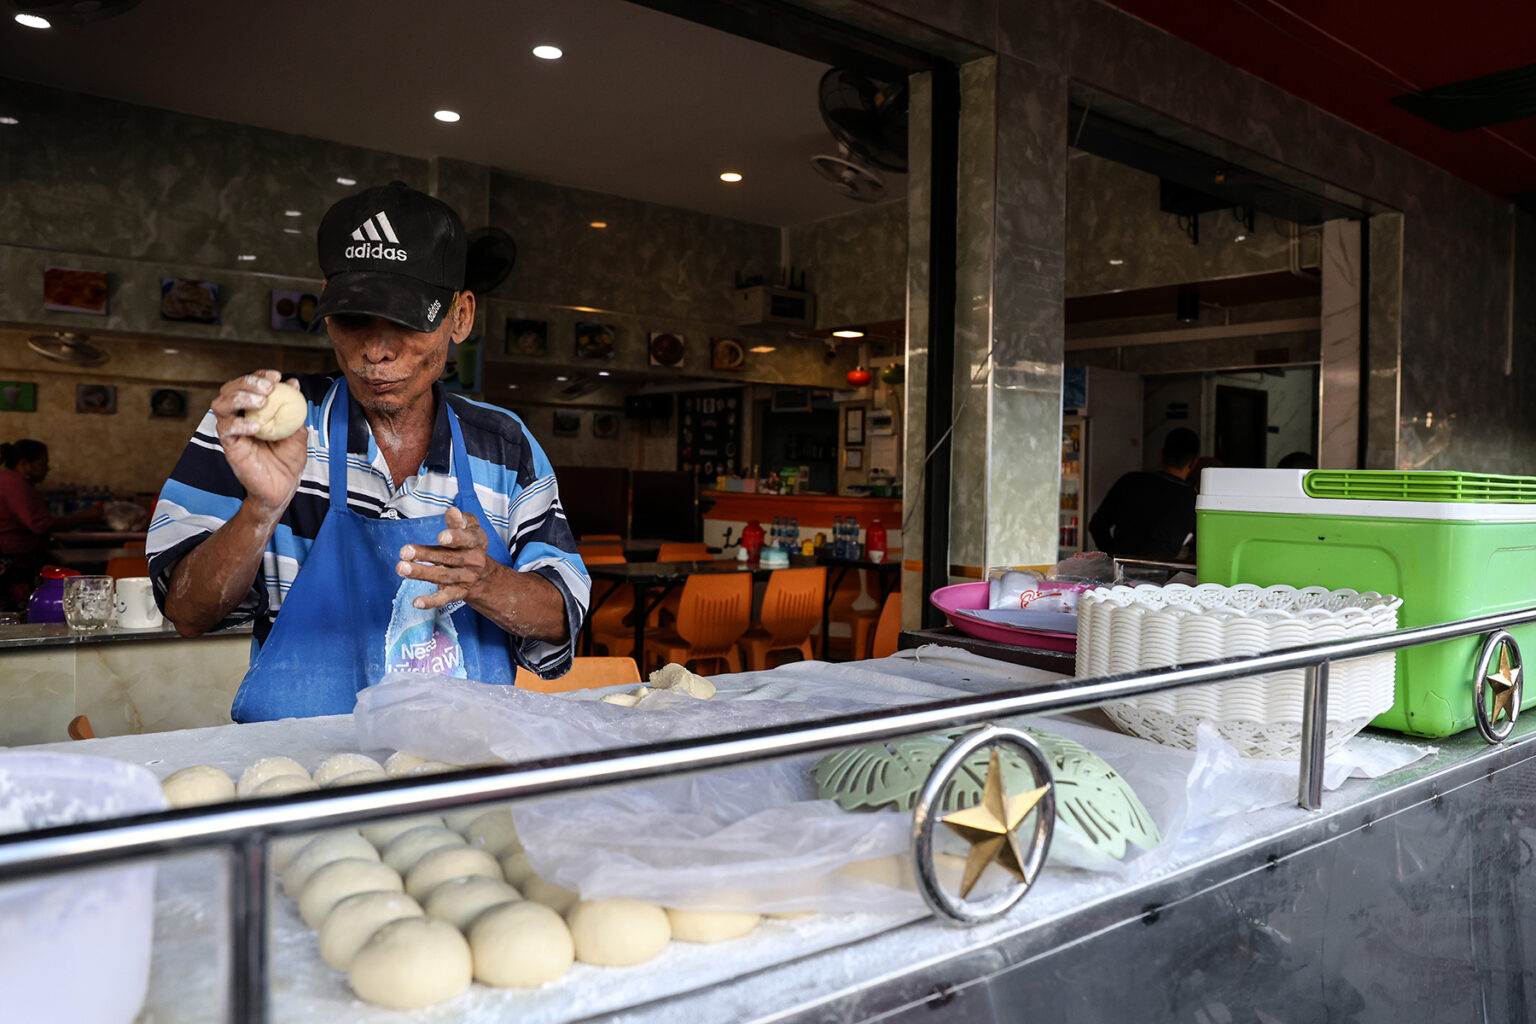 A market vendor stands behind his food counter rolling some kind of dough in his hand in Thailand